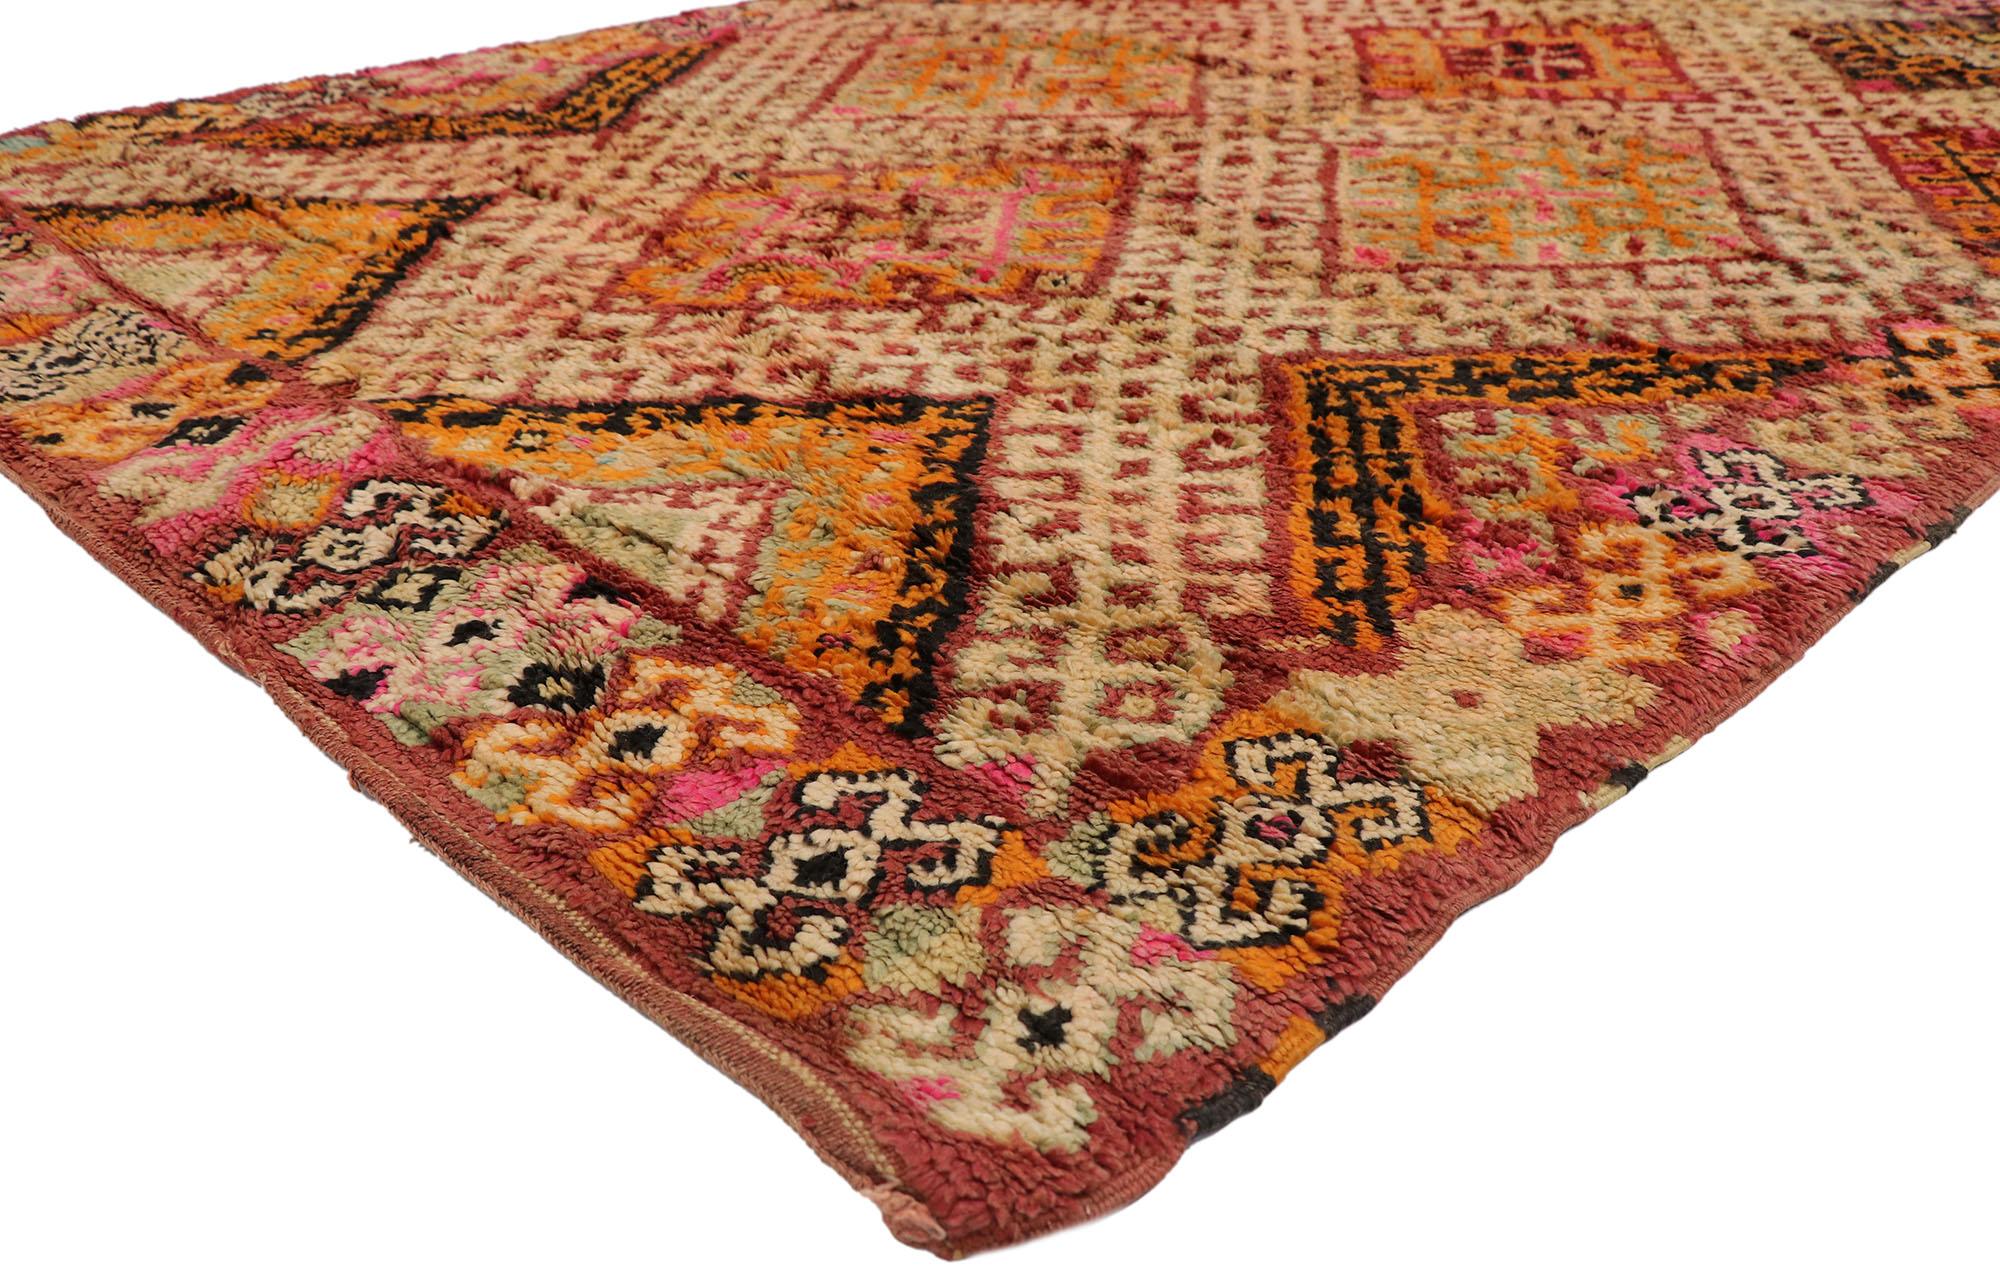 21522 Vintage Beni MGuild Moroccan Rug, 06'03 x 09'04.
Midcentury Modern meets cozy nomad in this hand knotted wool vintage Beni MGuild Moroccan rug. The geometric design and bold earthy hues woven into this piece work together resulting in an